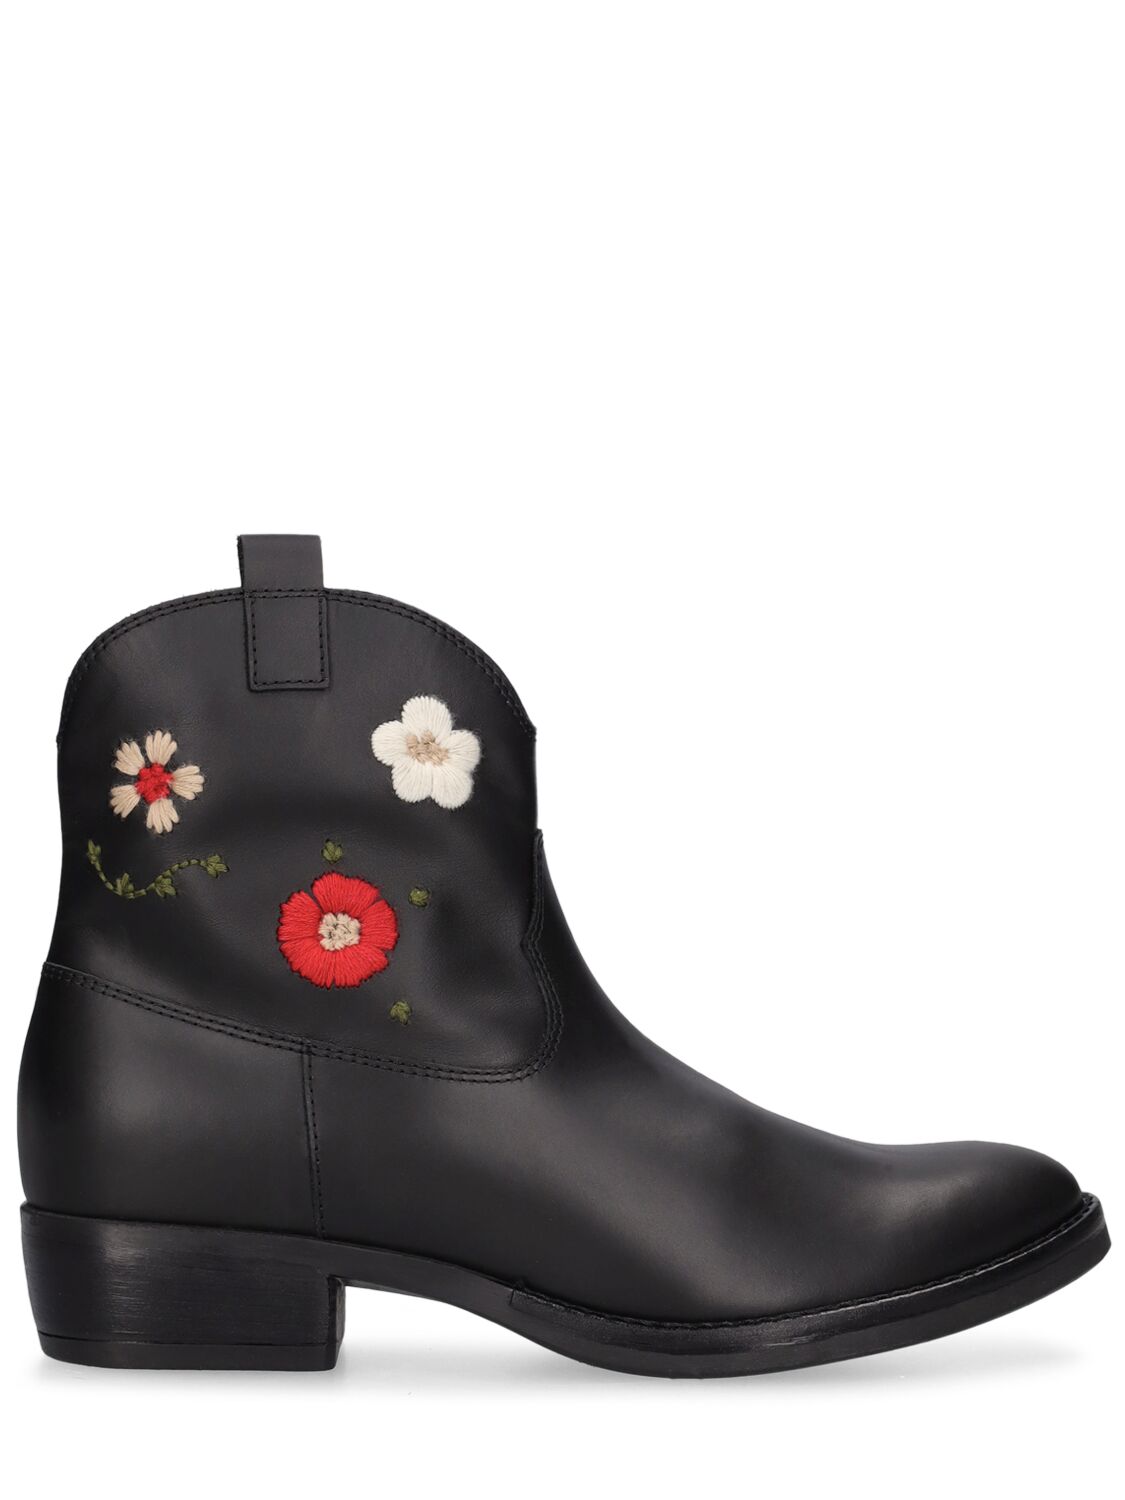 IL GUFO EMBROIDERED LEATHER TEXANO BOOTS